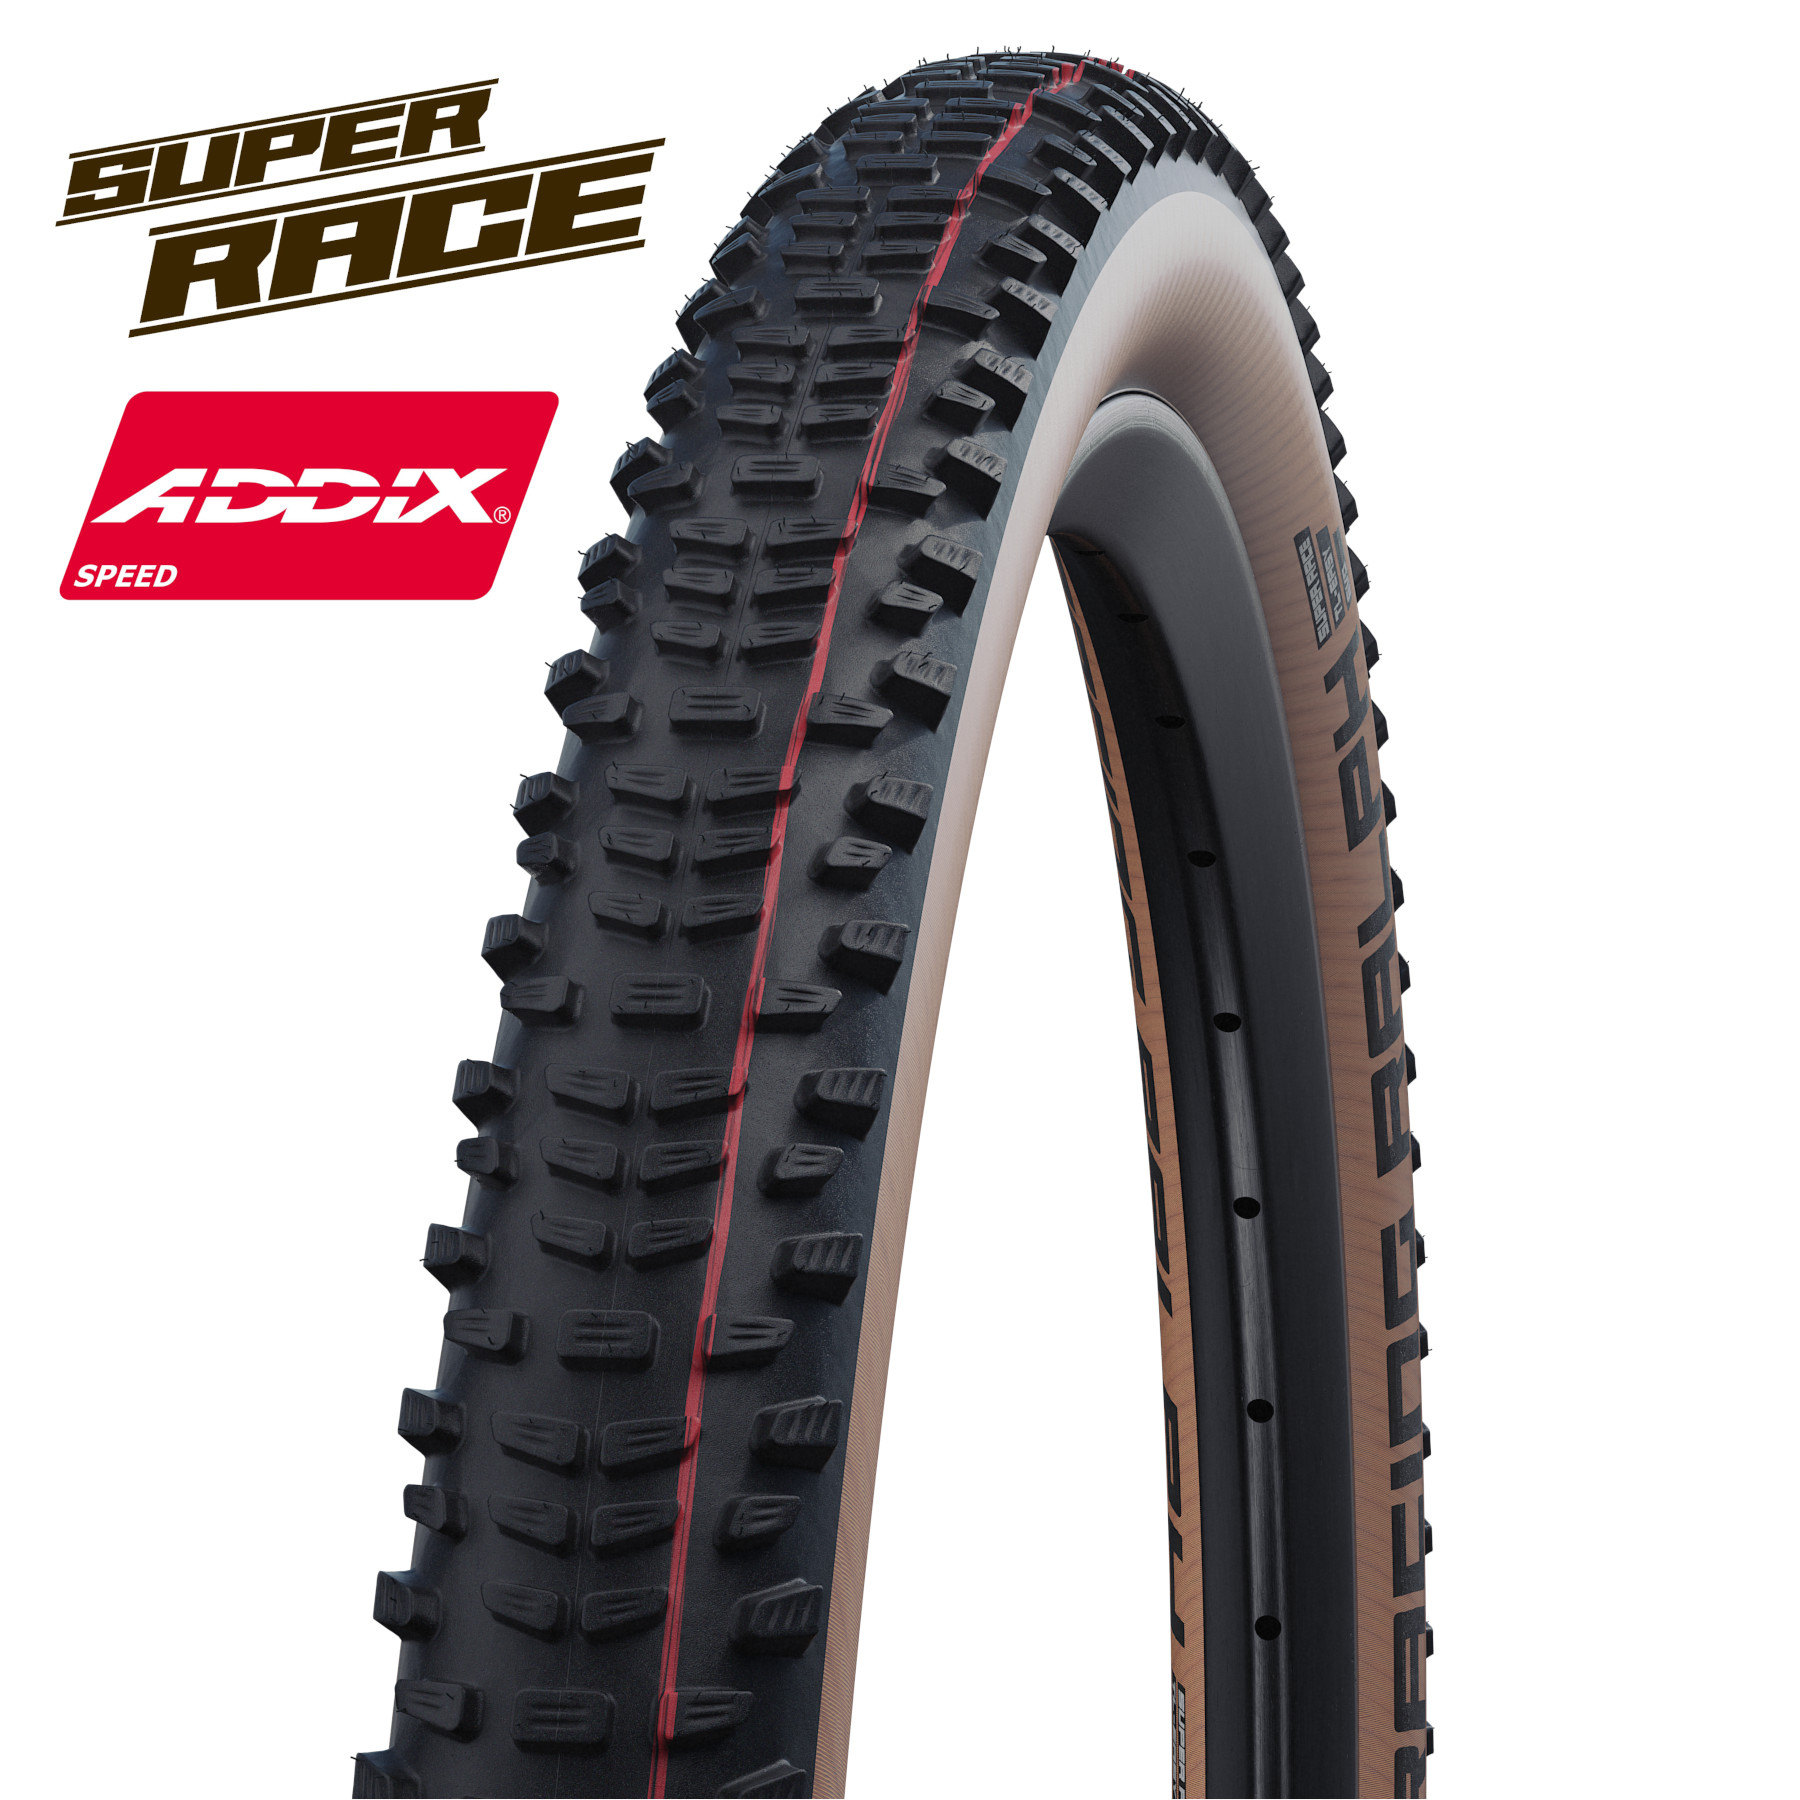 Picture of Schwalbe Racing Ralph Evolution MTB Folding Tire - AddixSpeed - SuperRace - TLEasy - 29x2.25 Inches - Transparent-Skin